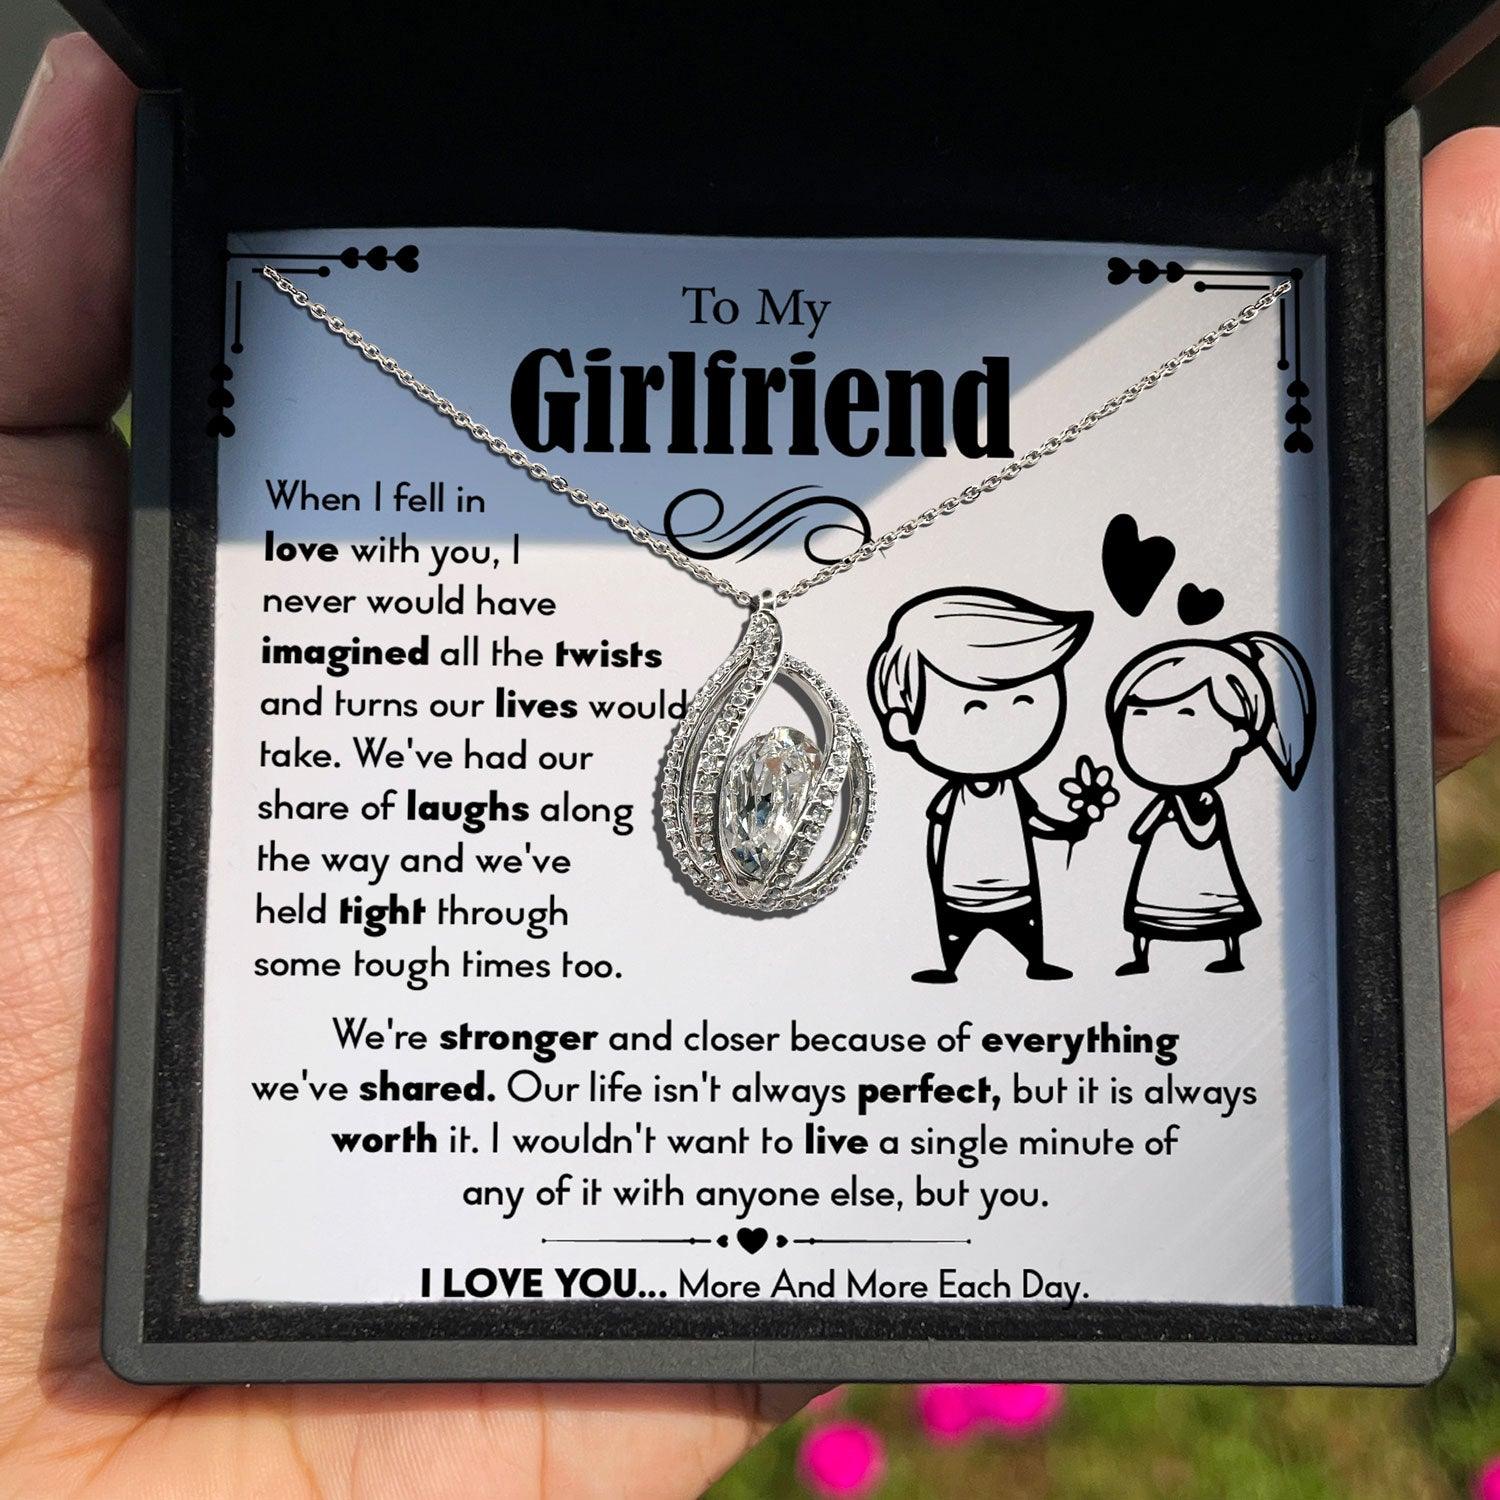 To My Girlfriend - Our Life Isn't Always perfect, But It is Always worth It - Orbital Birdcage Necklace - TRYNDI